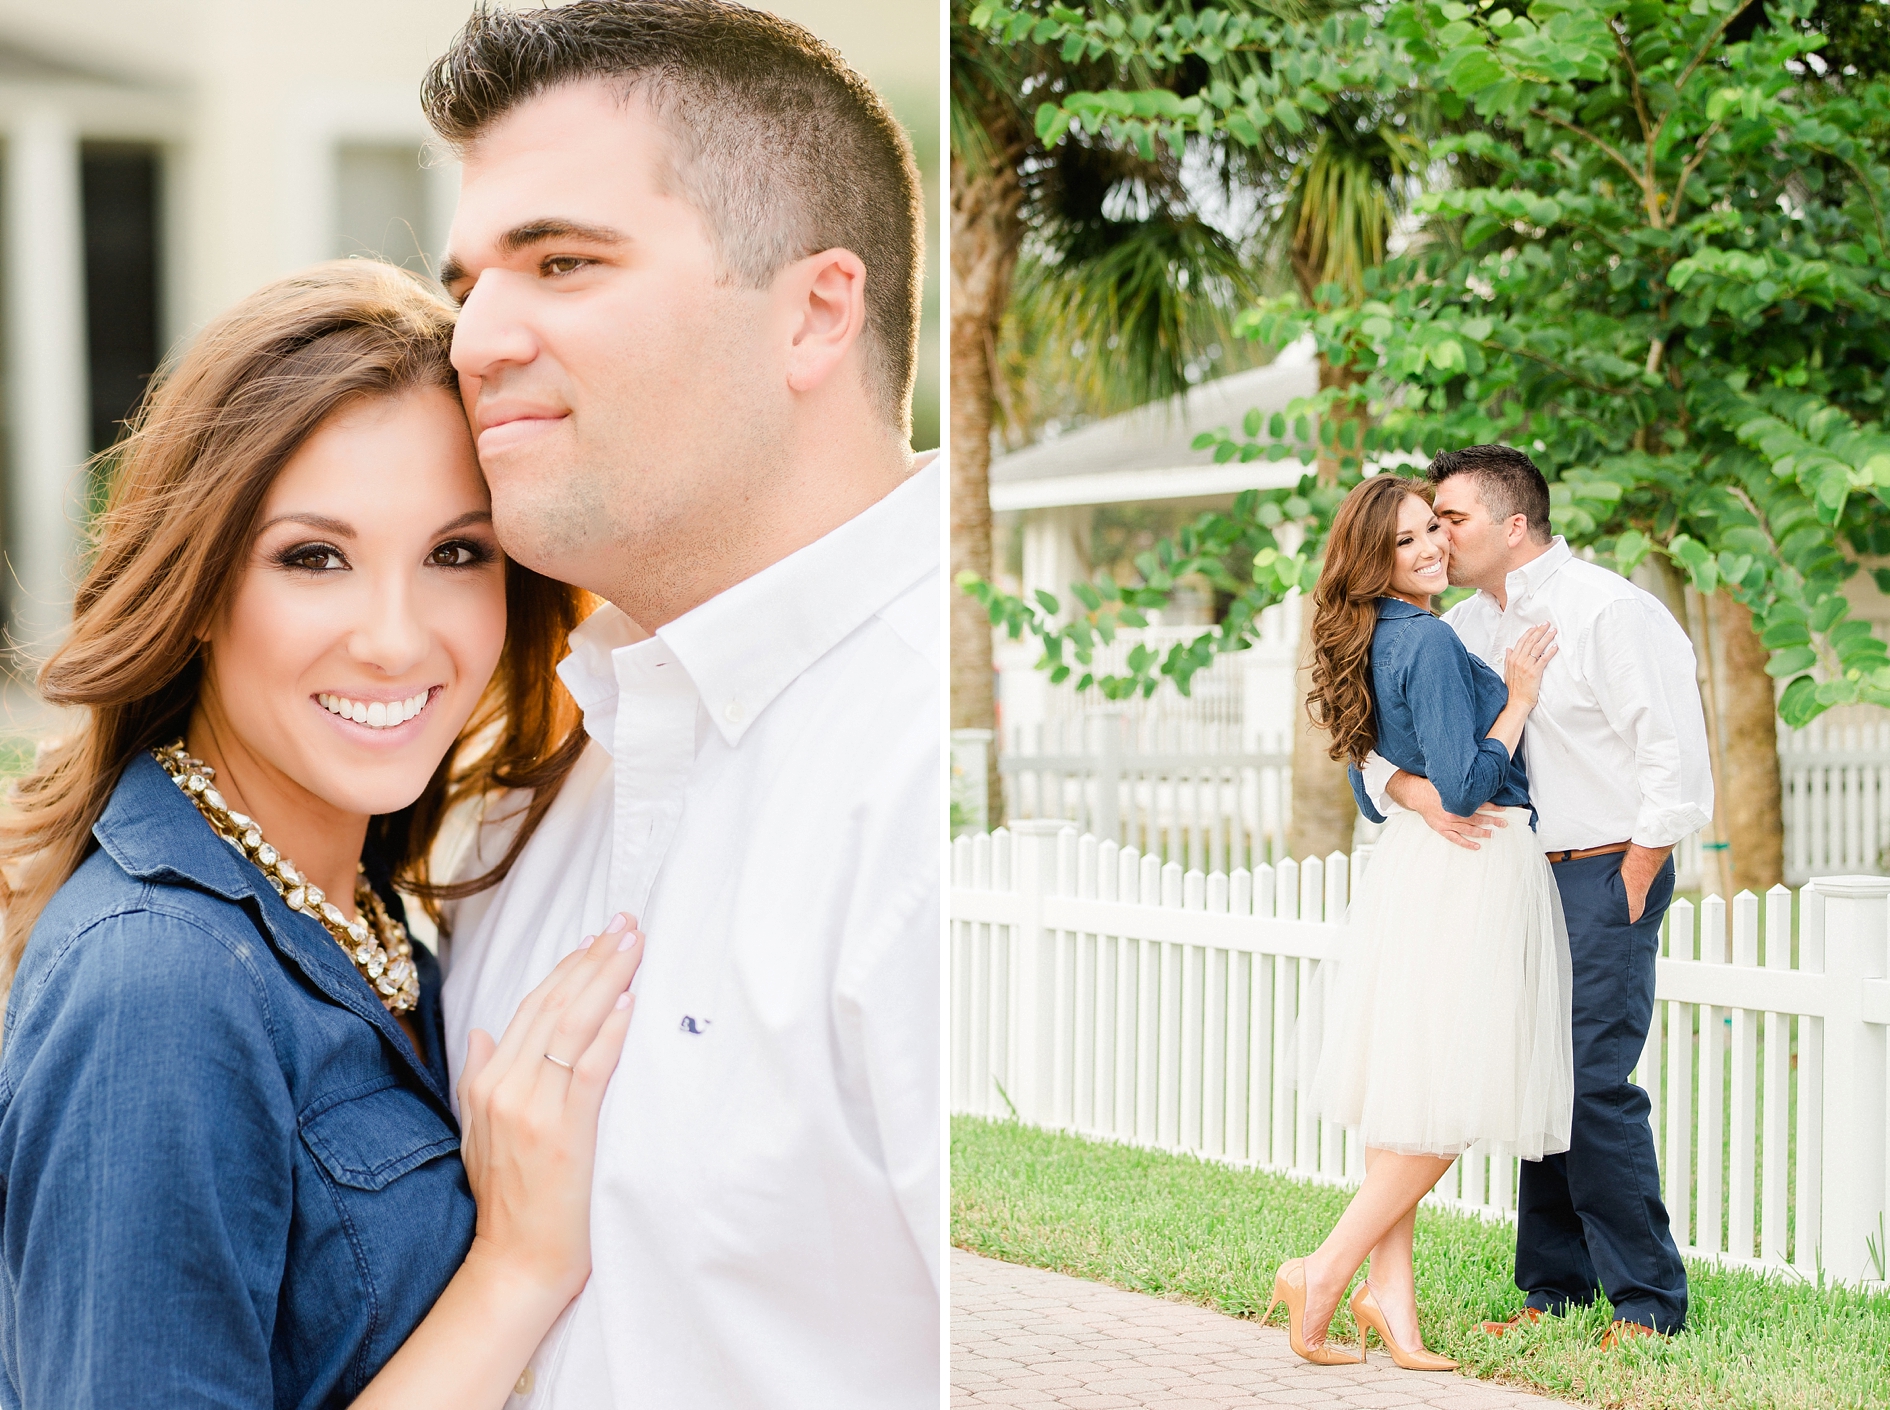 Tampa Engagement | © Ailyn La Torre Photography 2015